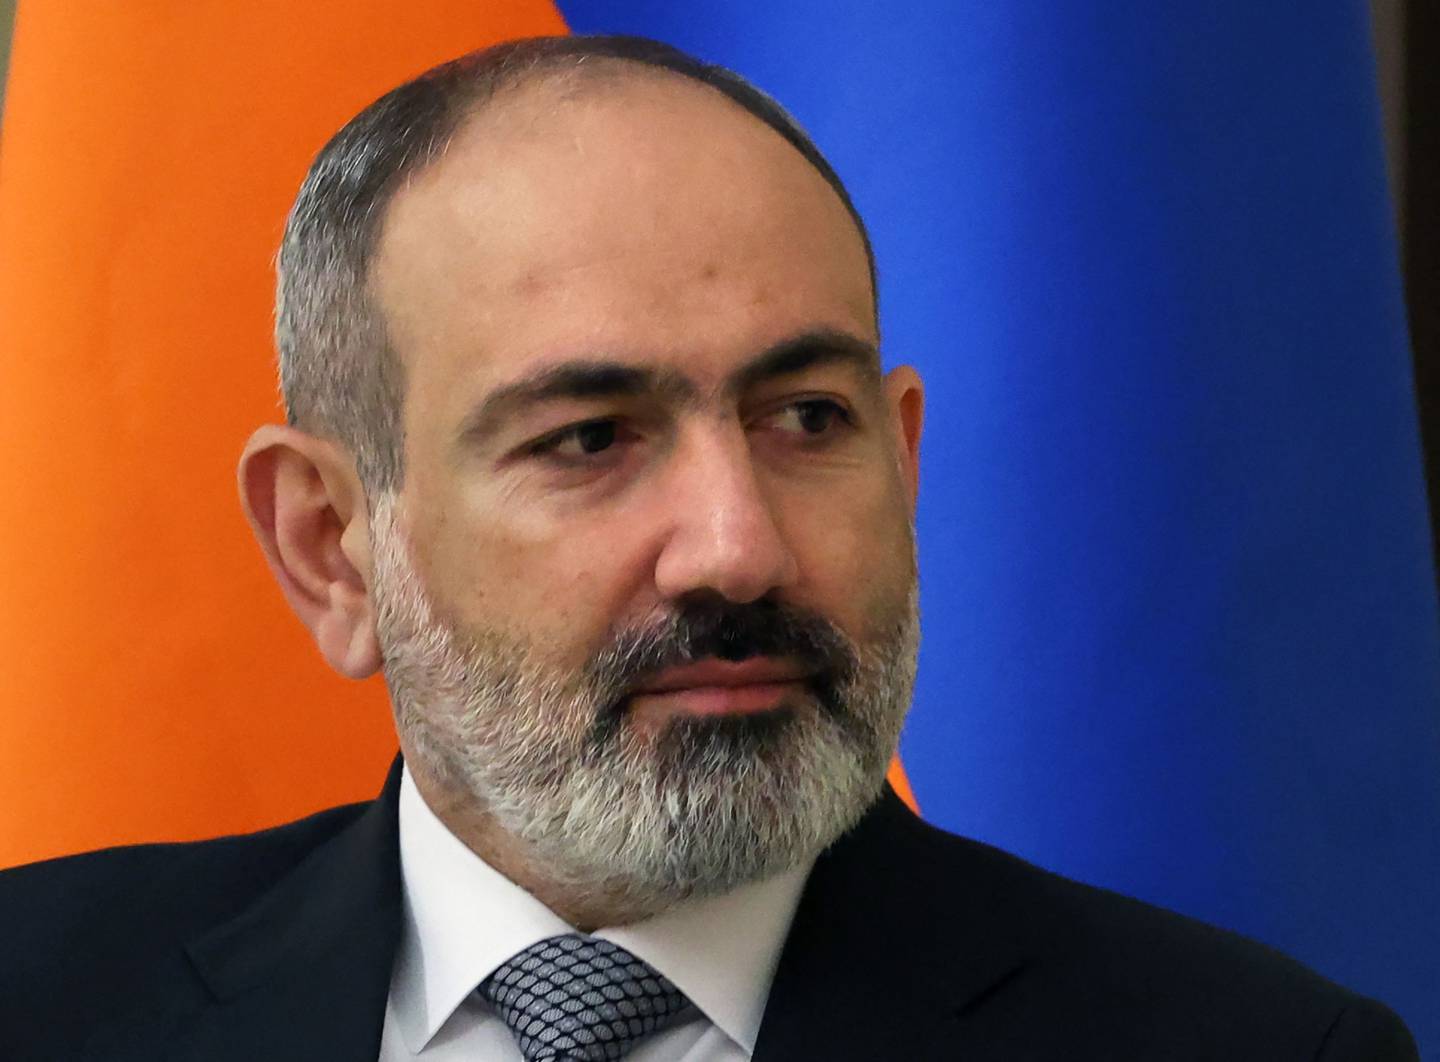 Armenia's Prime Minister Nikol Pashinyan spoke with the French and Russian presidents as well as the US secretary of state after 'provocative, aggressive actions' by Azerbaijan. AFP